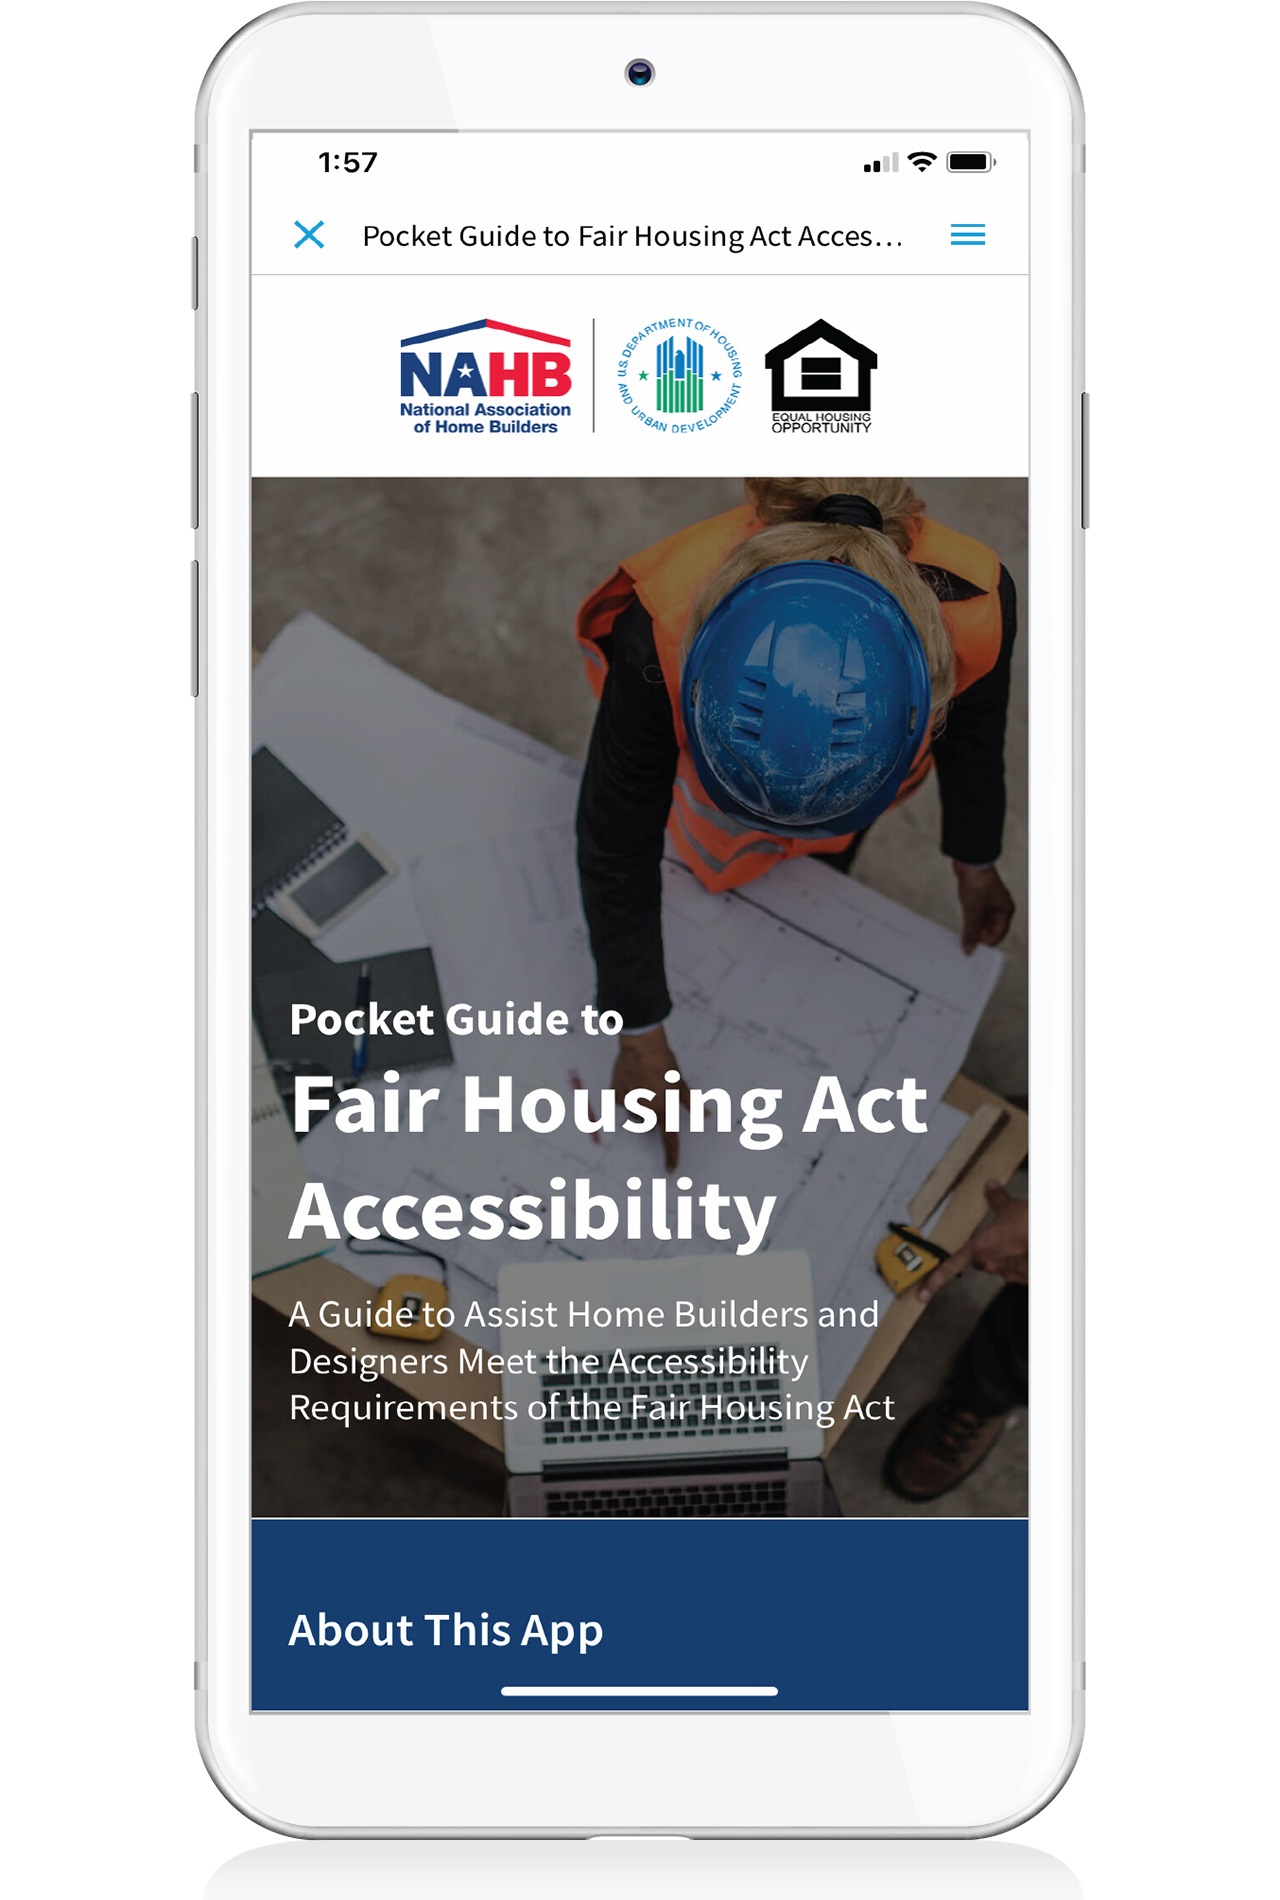 The Pocket Guide to Fair Housing Act Accessibility App Displayed on an iphone